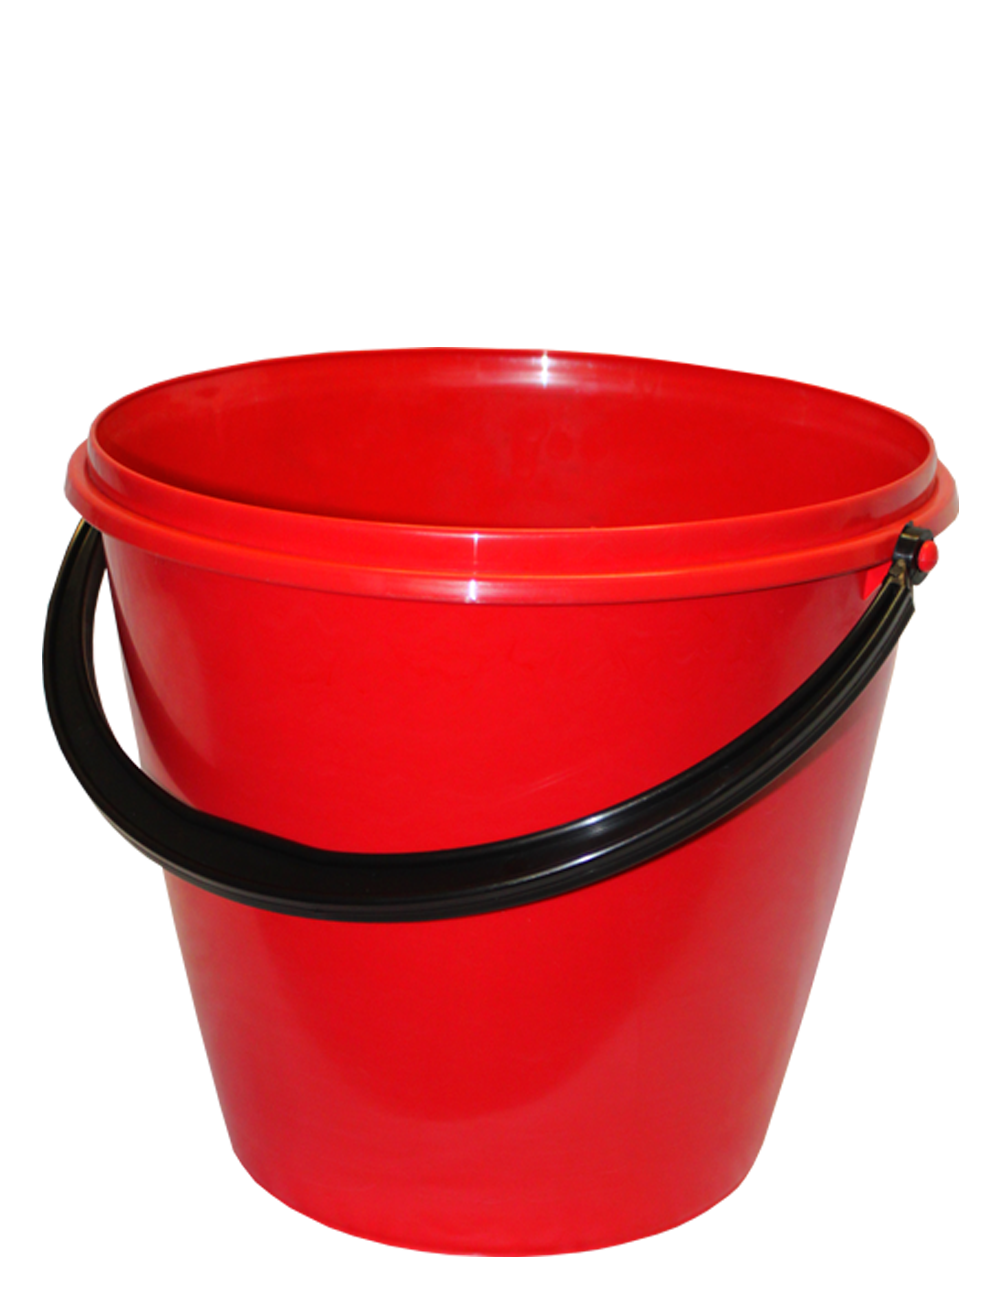 Plastic Red Bucket Png Image - Bucket, Transparent background PNG HD thumbnail